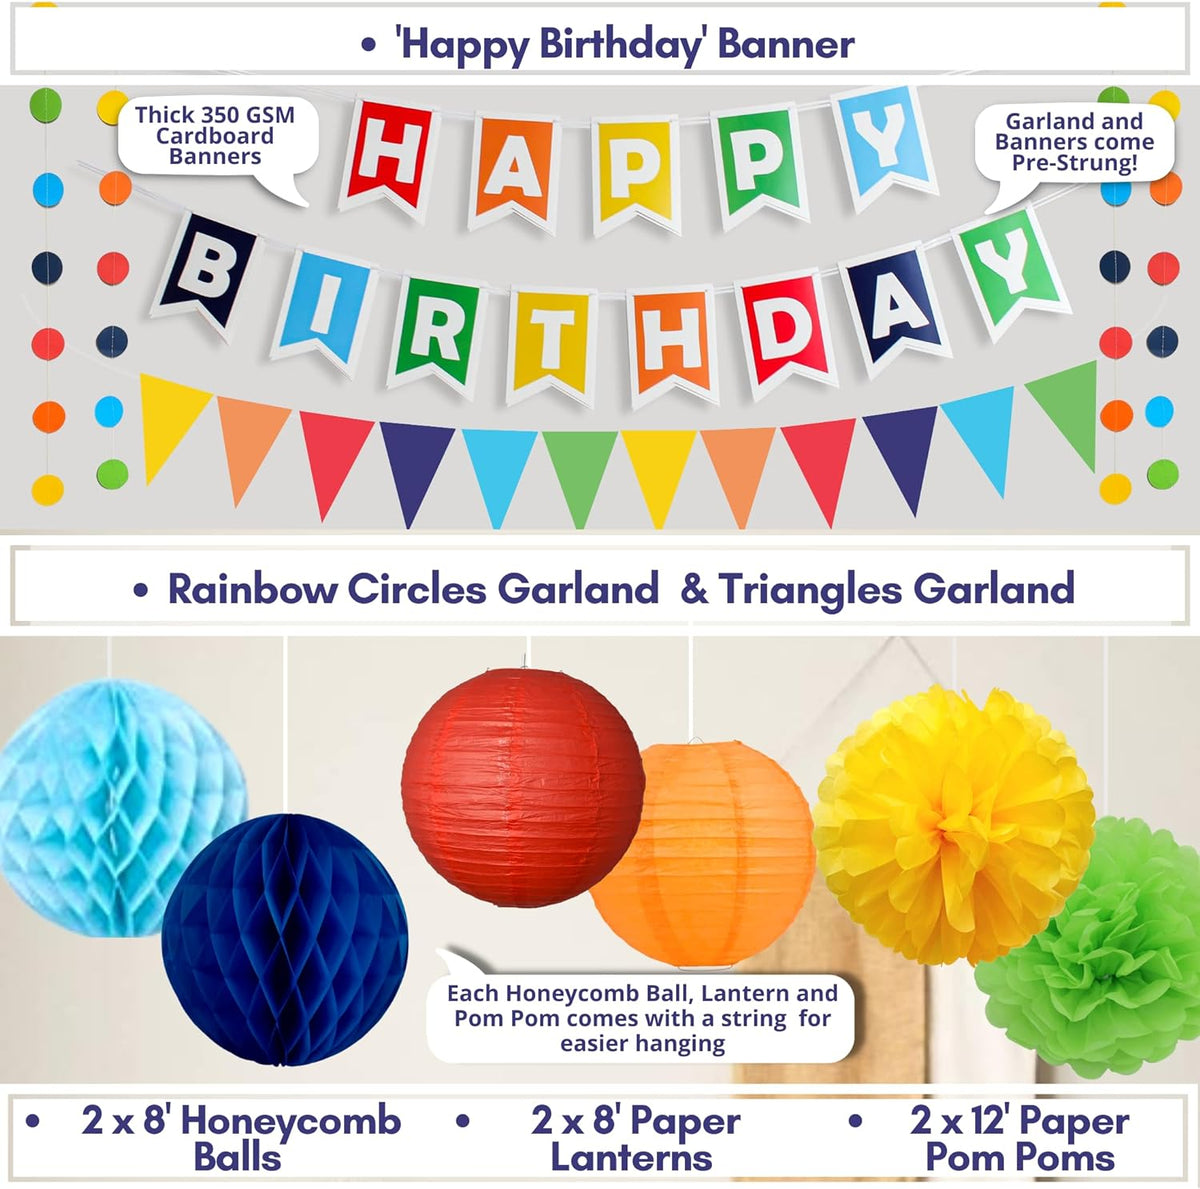 Rainbow Party-Decorations Paper-Garland Streamers Banner - 52ft Colorful Theme Boy Girl Kids Birthday Favors Supplies,Baby Shower Wedding Hanging